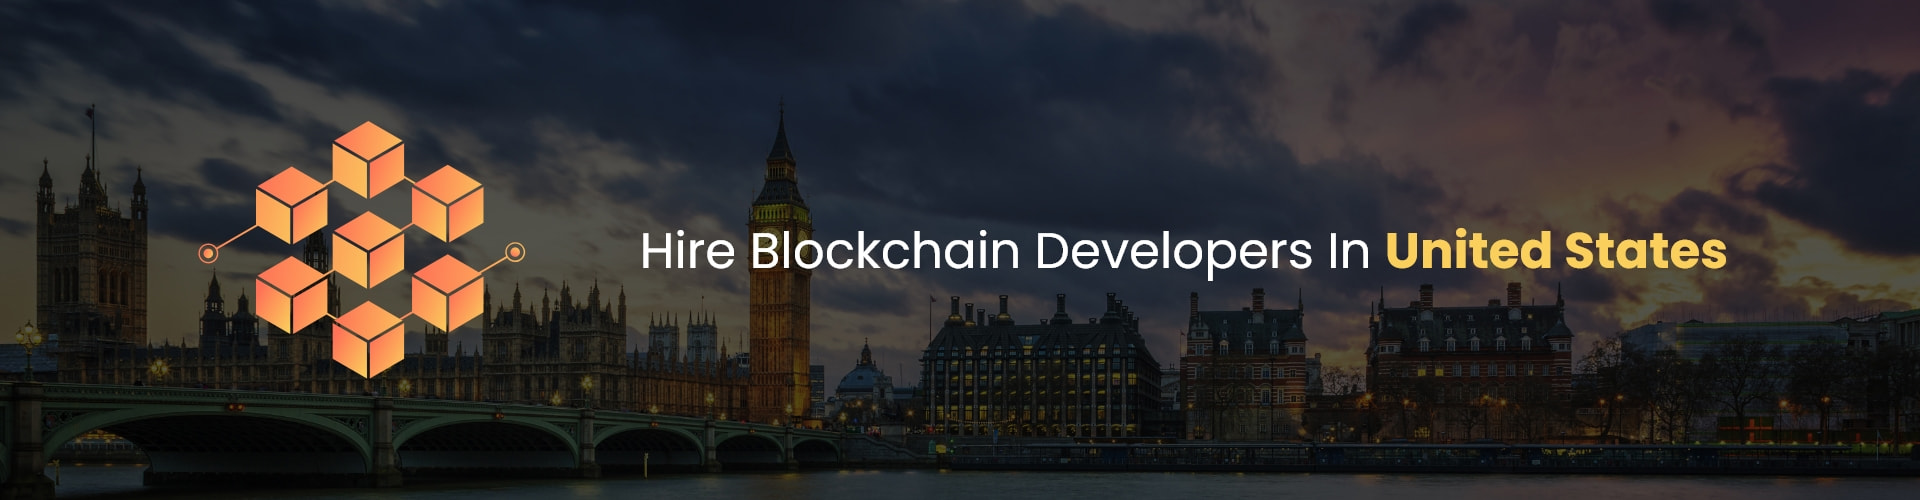 hire blockchain developers in united states